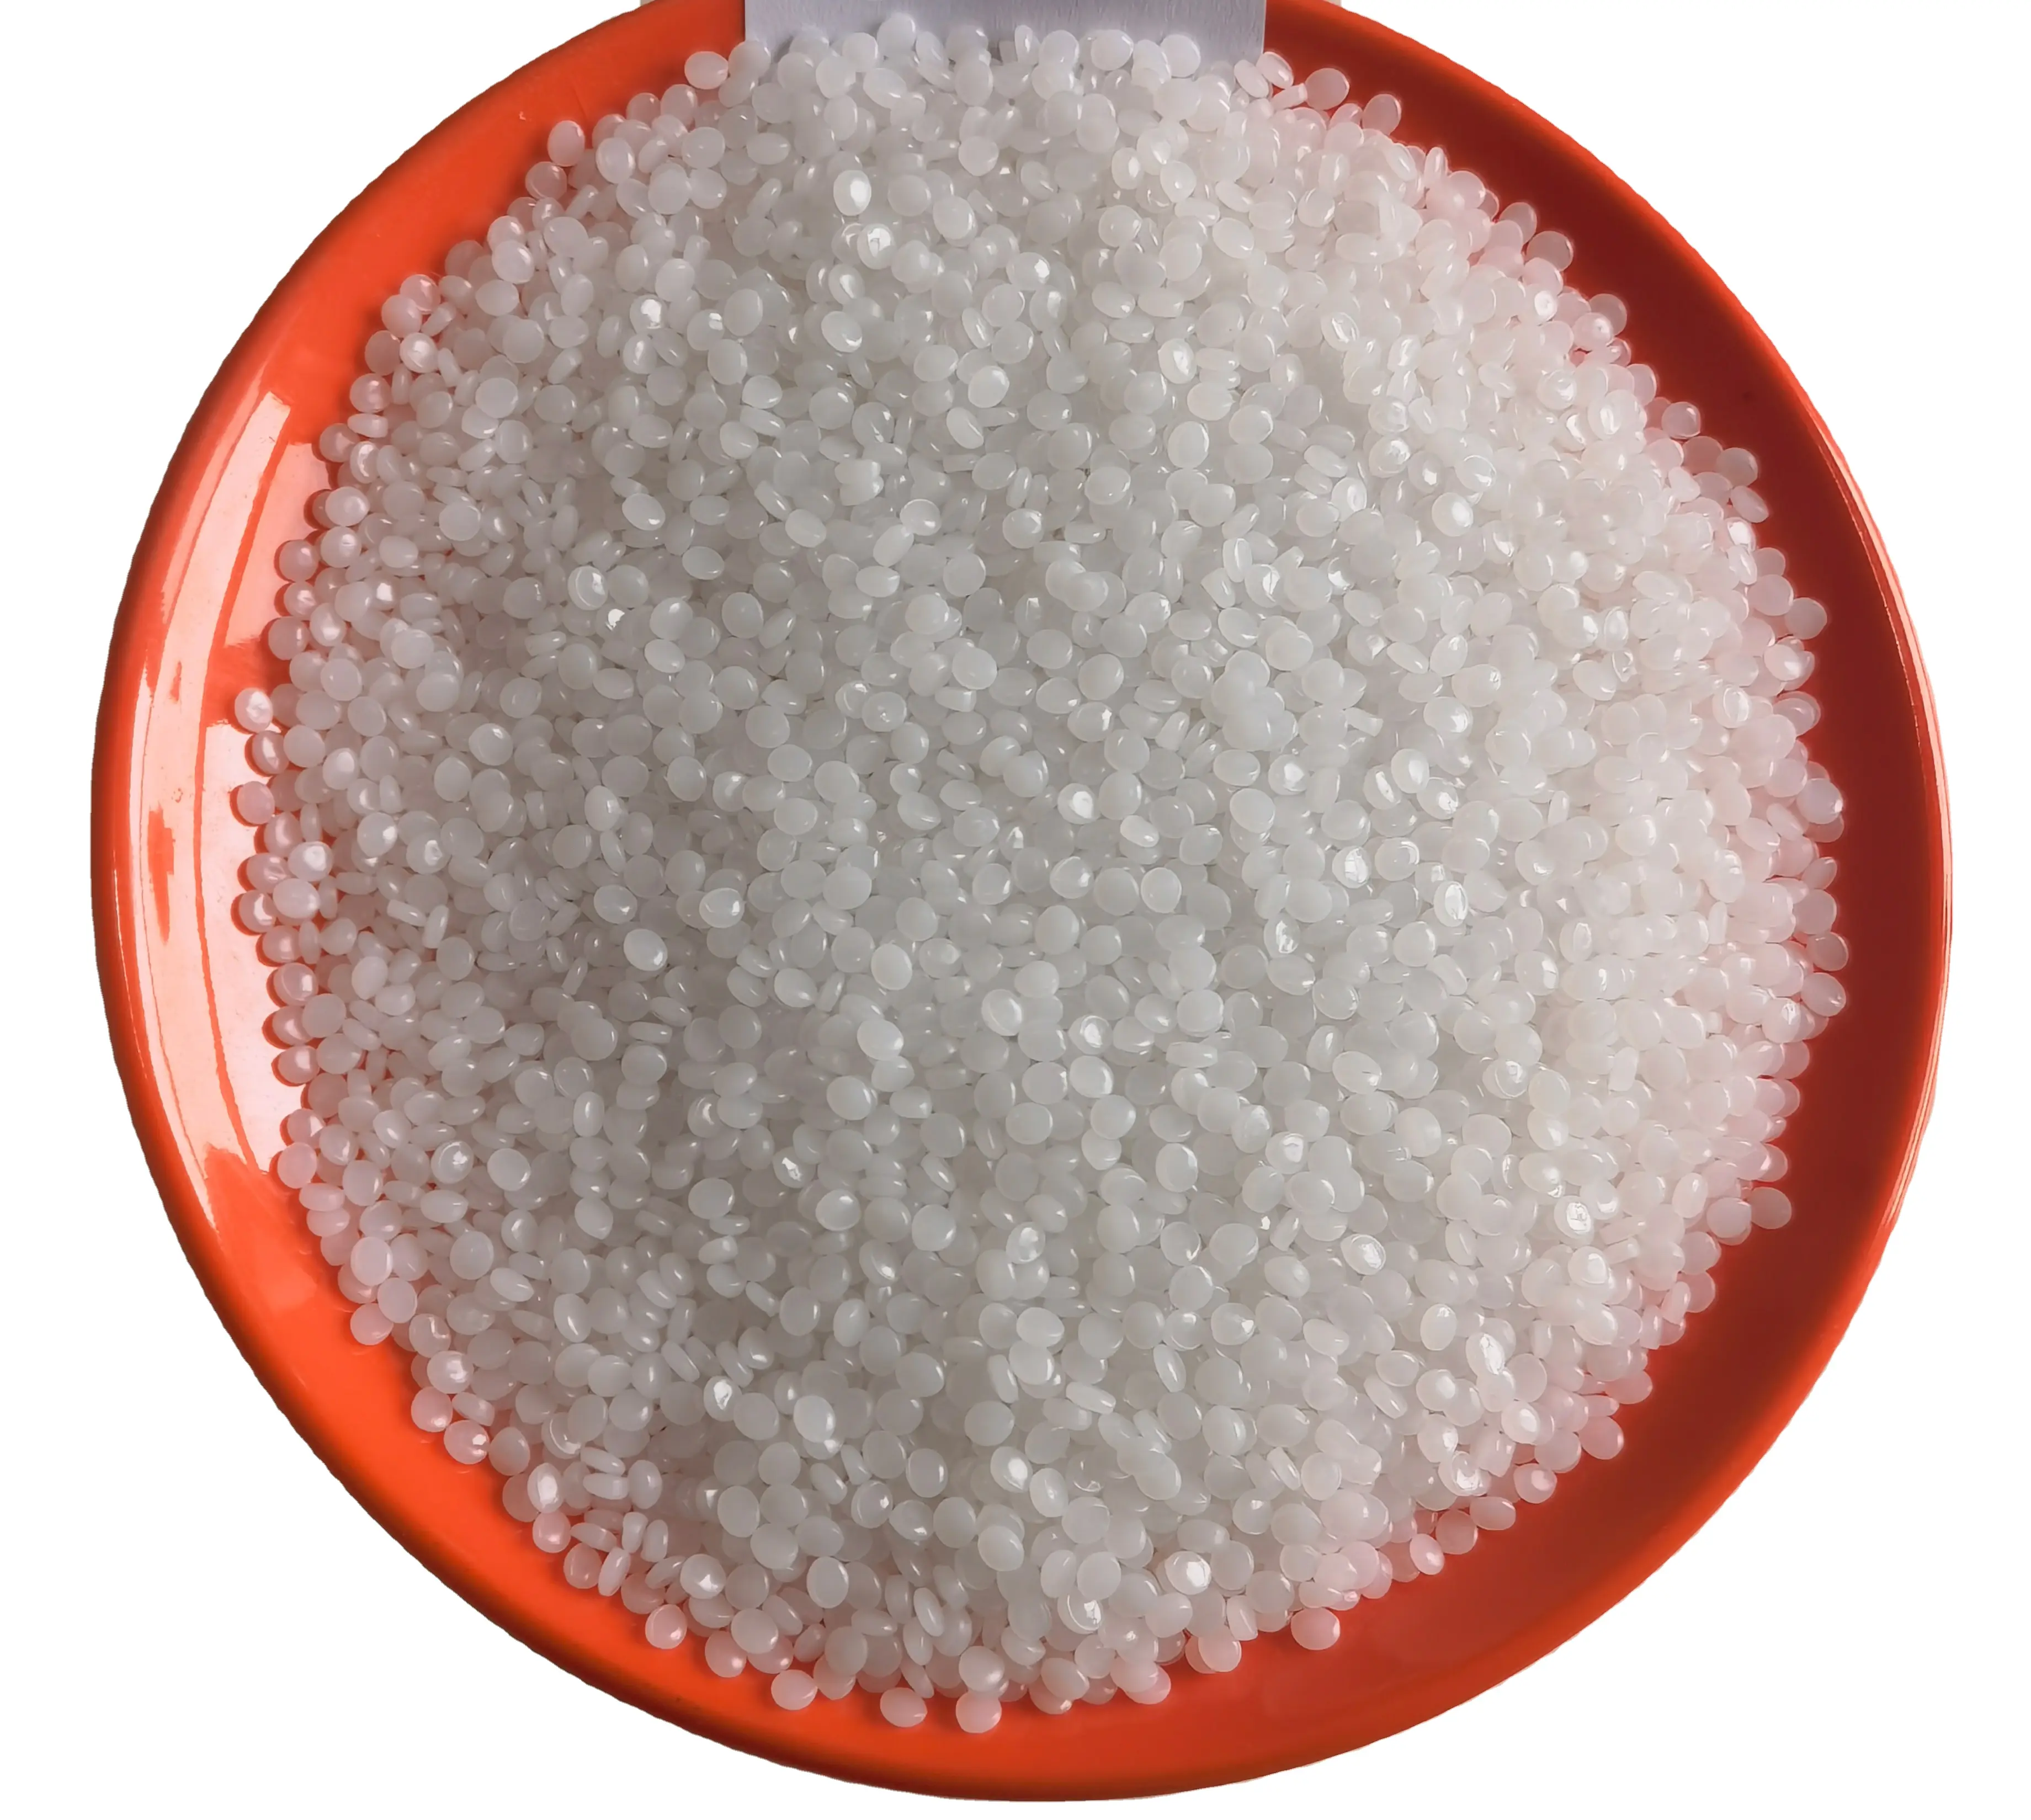 virgin HDPE DMDA-8920 plastic resin granules particles raw materials for Container/toys making